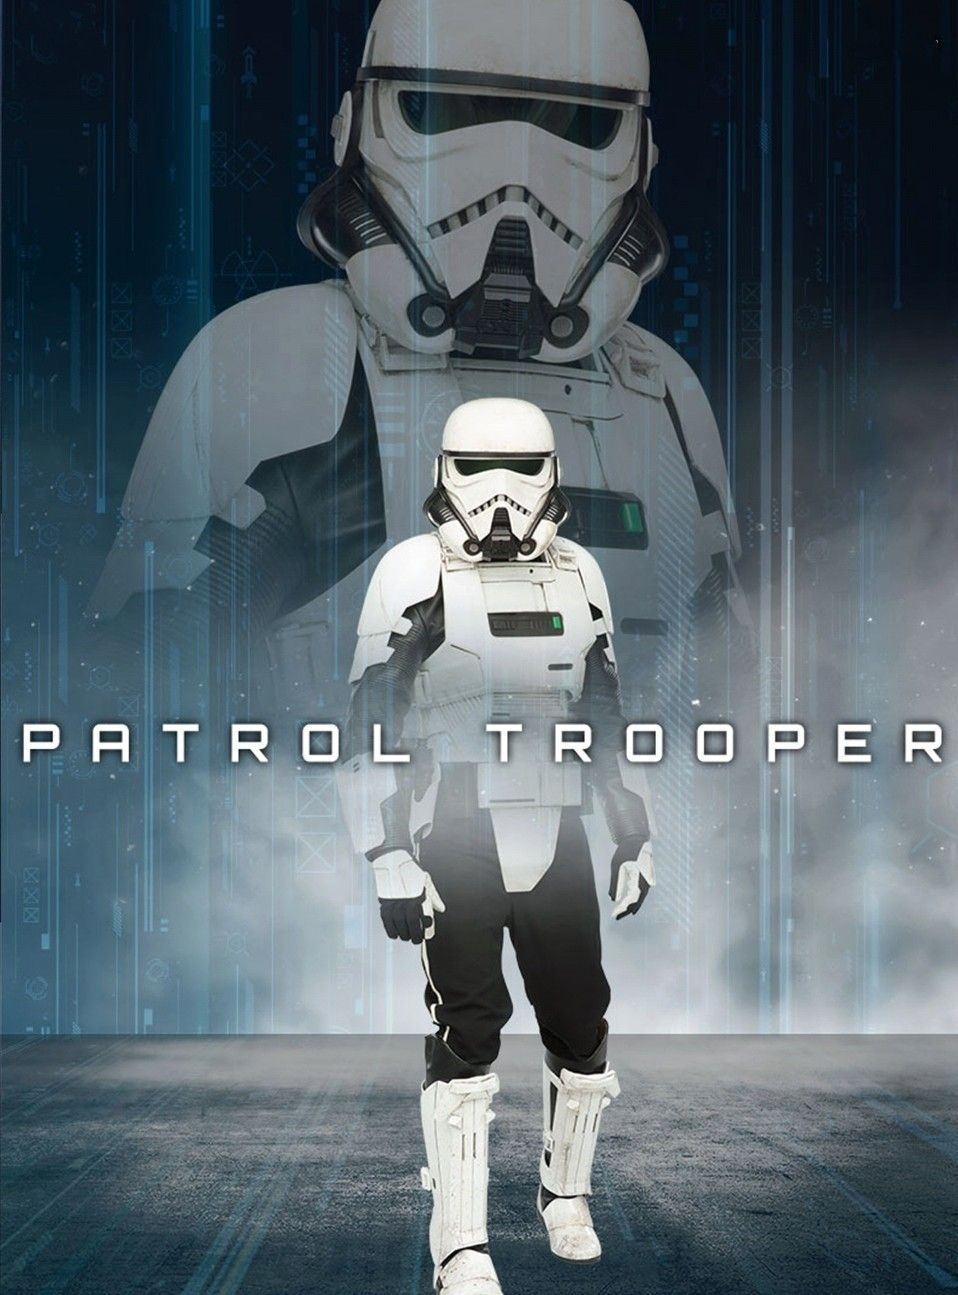 Patrol Trooper from Solo. Love the look of these characters. #patroltrooper #stormtrooper #galacticempire #im. Star wars picture, Star wars rpg, Star wars helmet